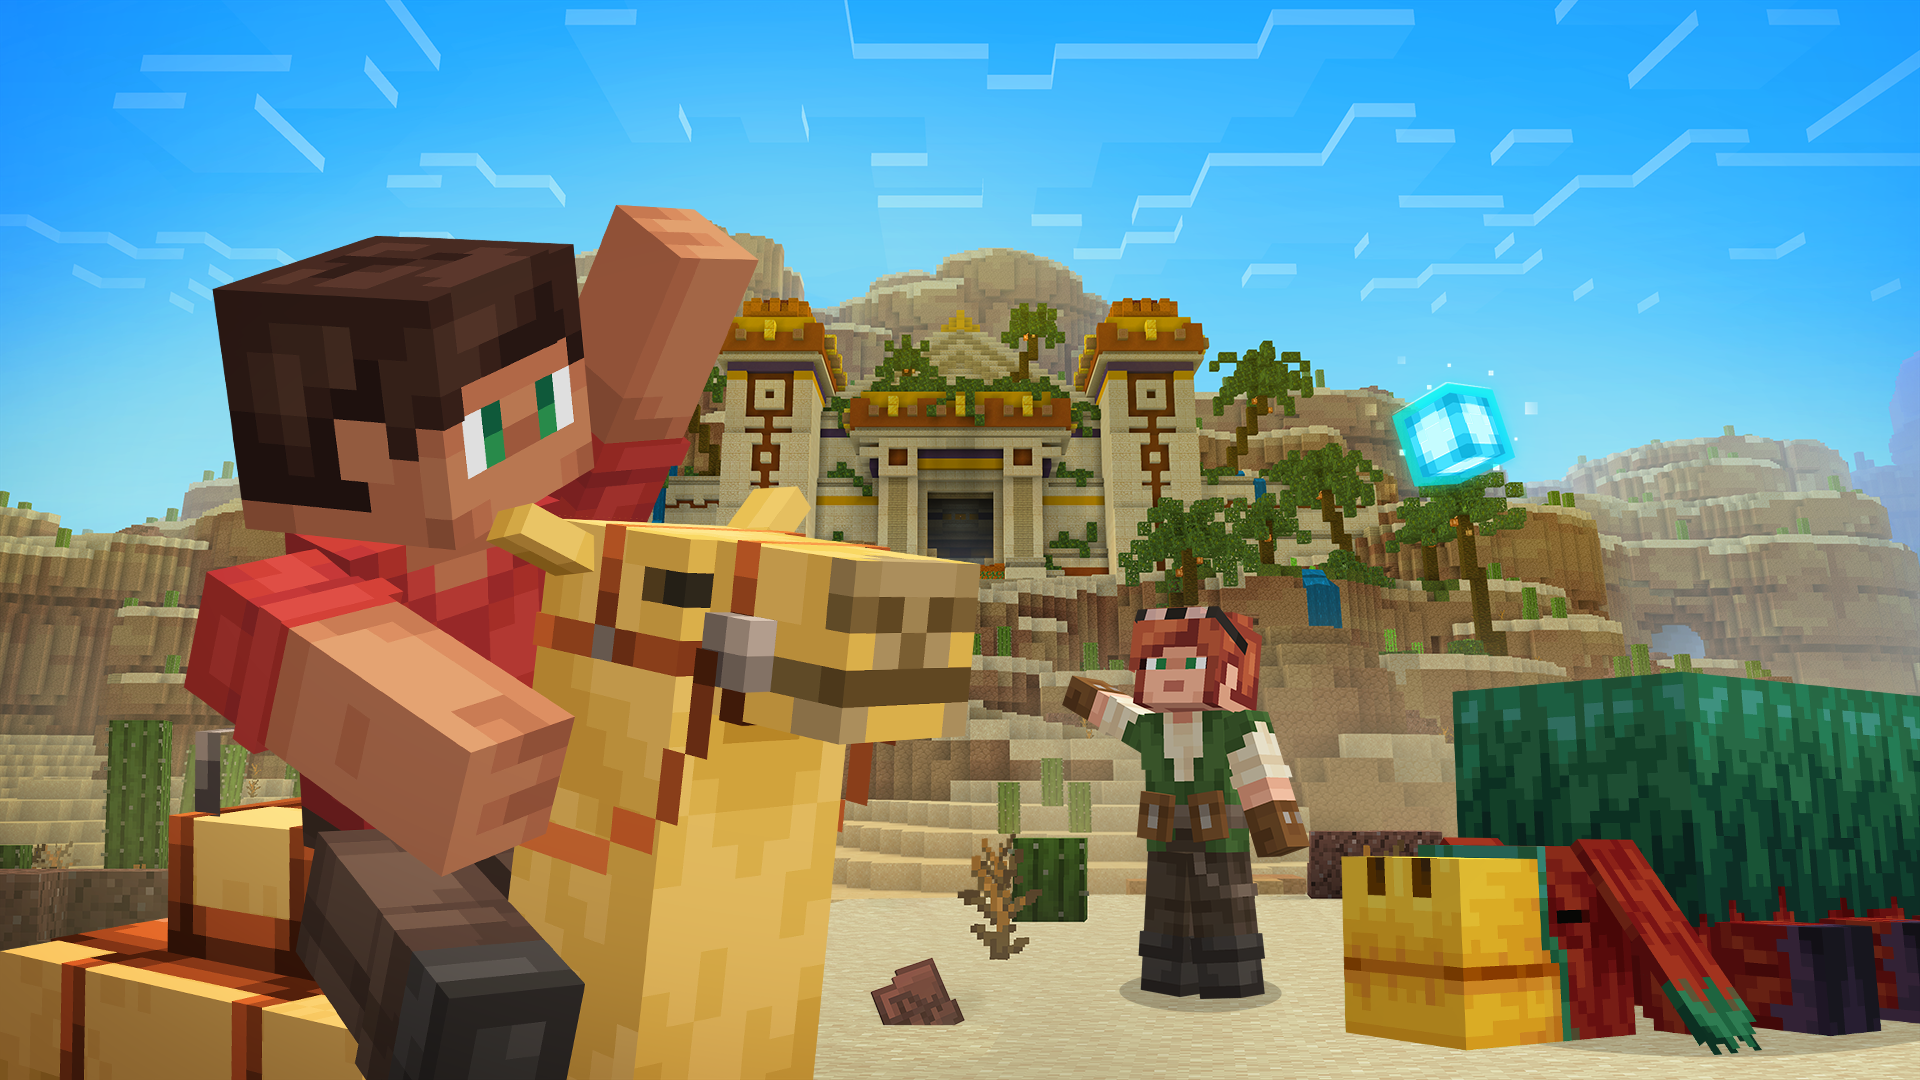 When Is the 'Minecraft' 1.20 Update Coming Out? Trials & Tales